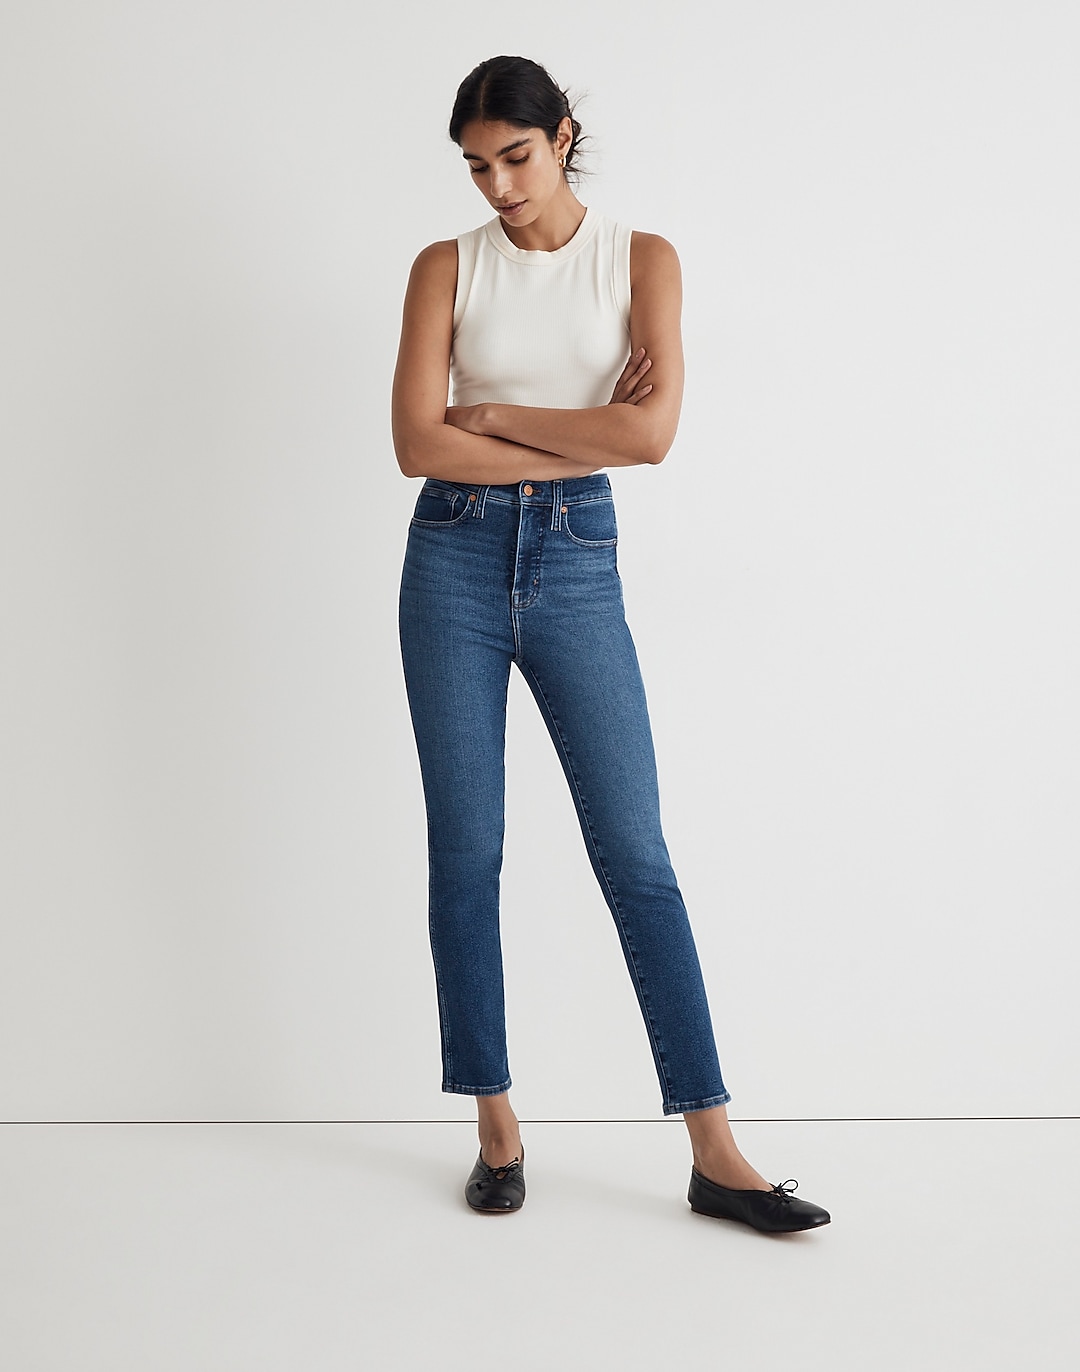 Stovepipe Jeans | Madewell